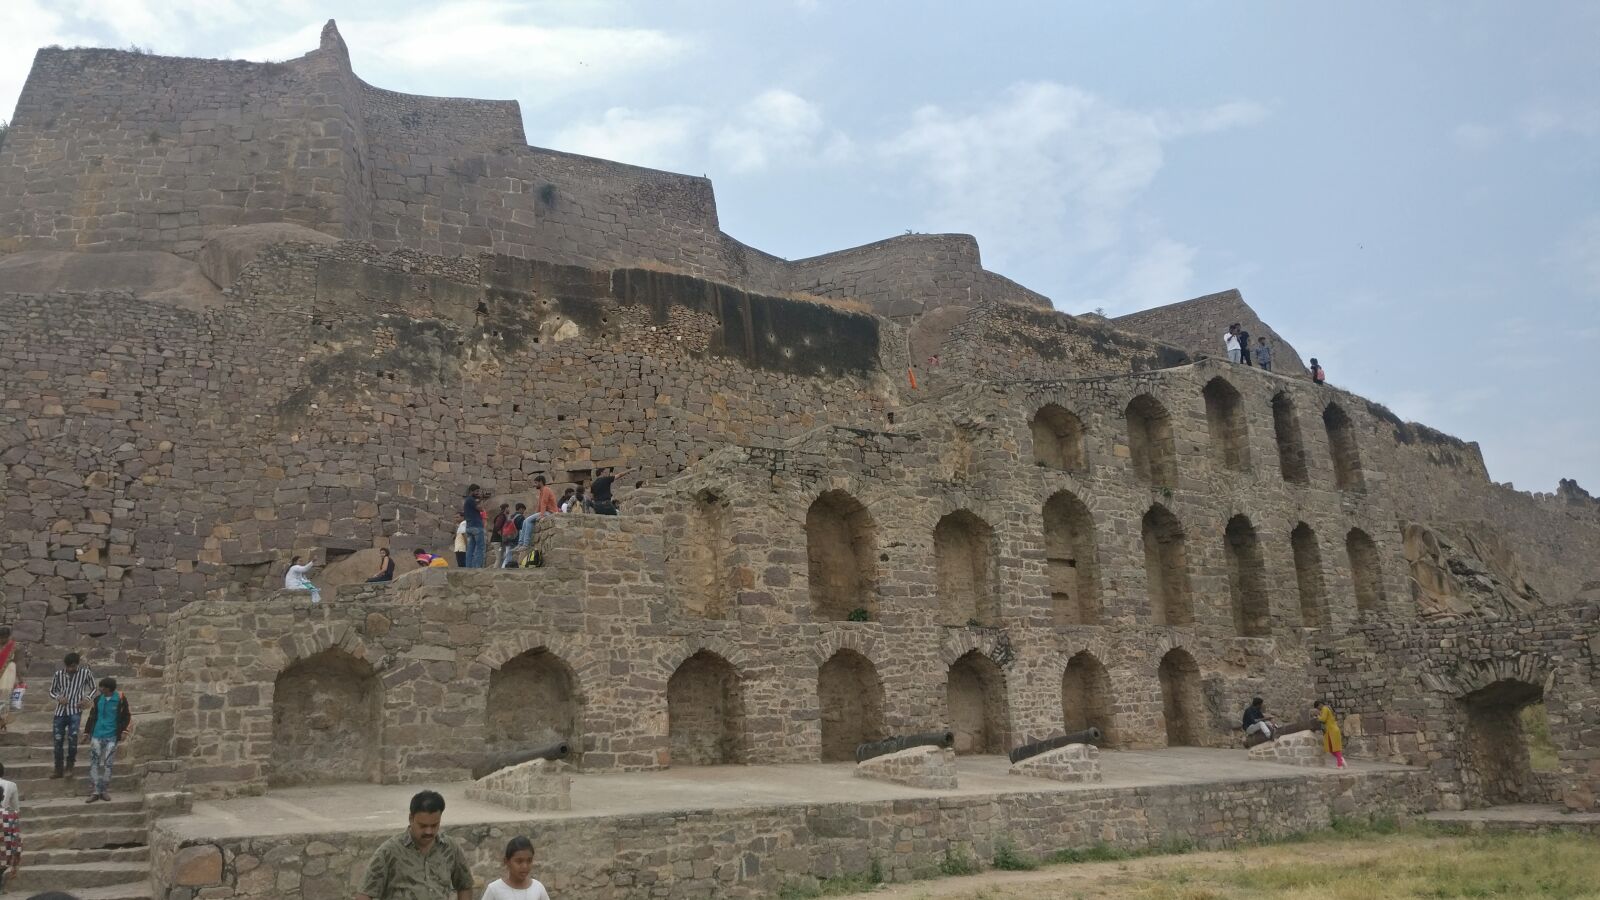 OnePlus A3003 sample photo. Golconda fort, india, qutb photography